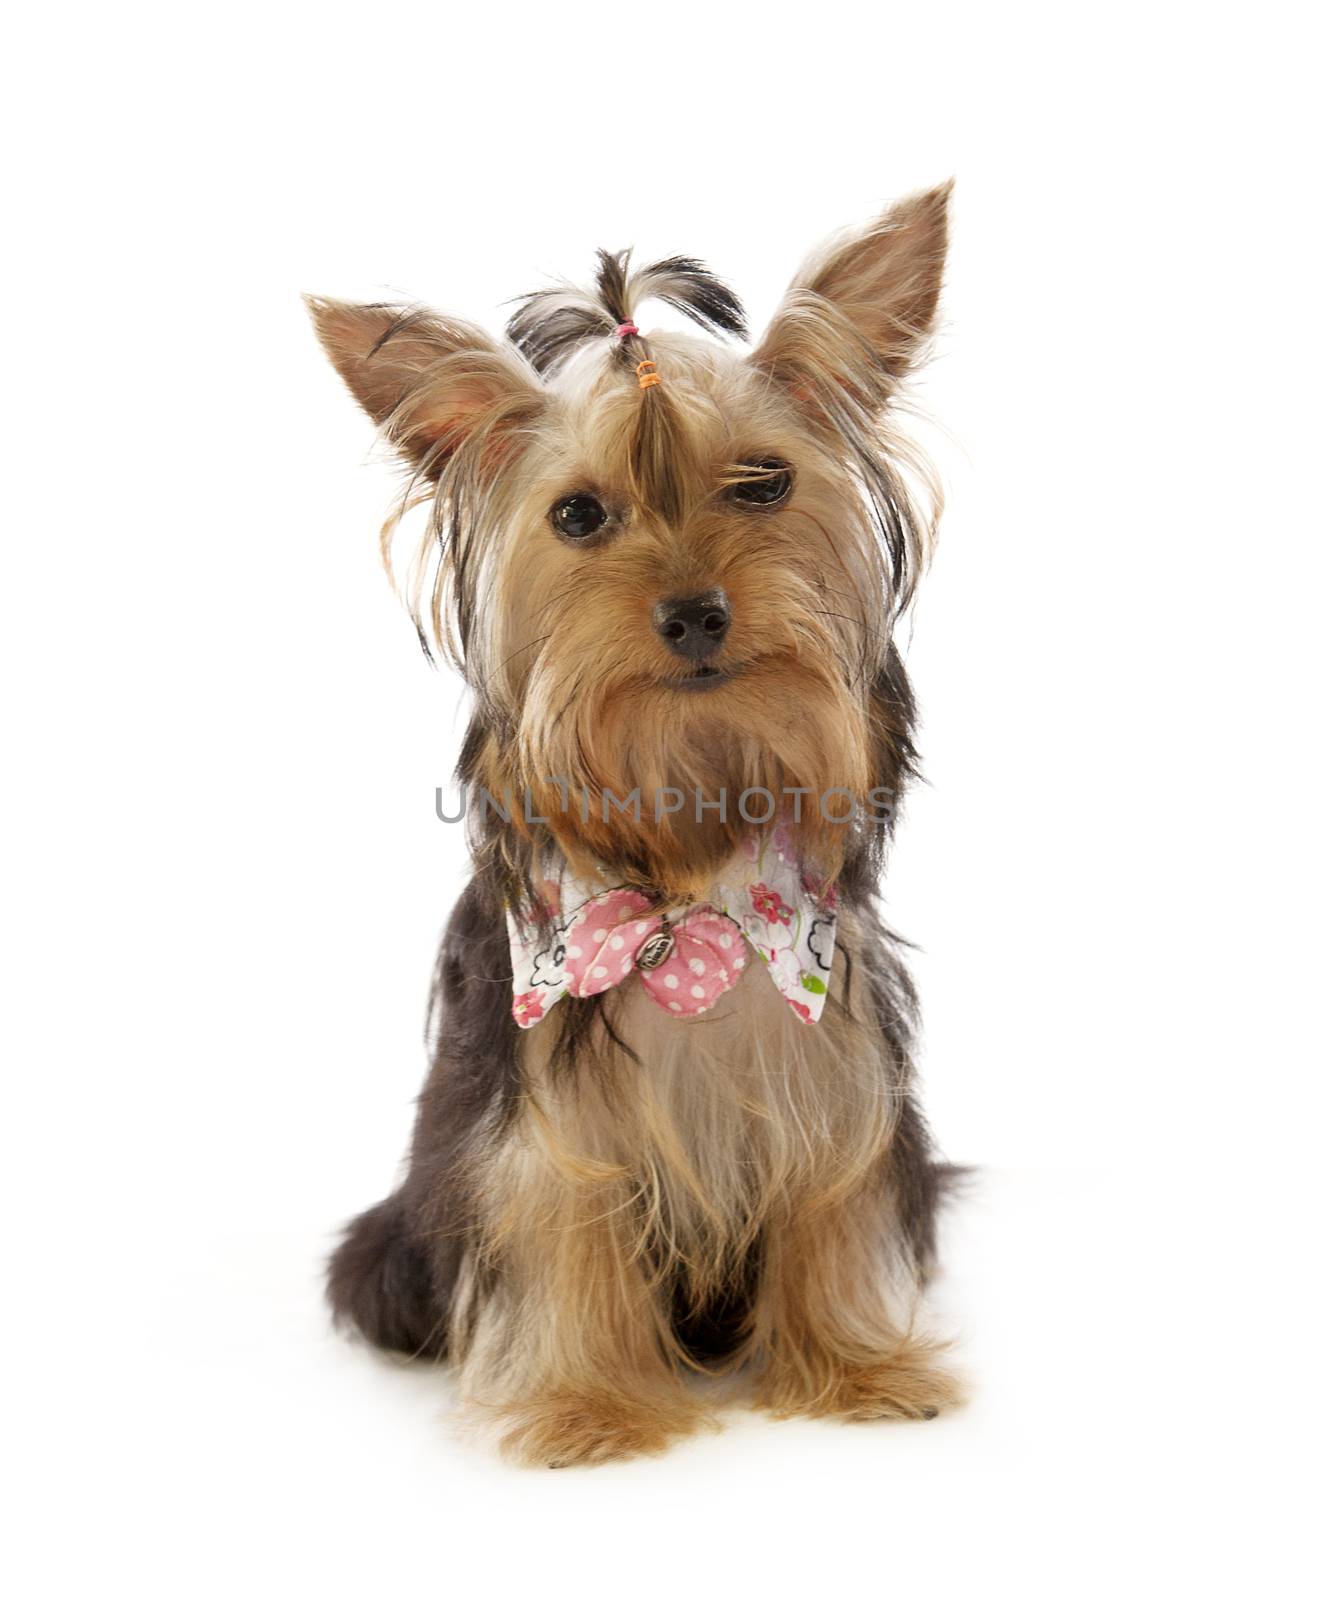 Beautiful Yorkie on white background by sommai